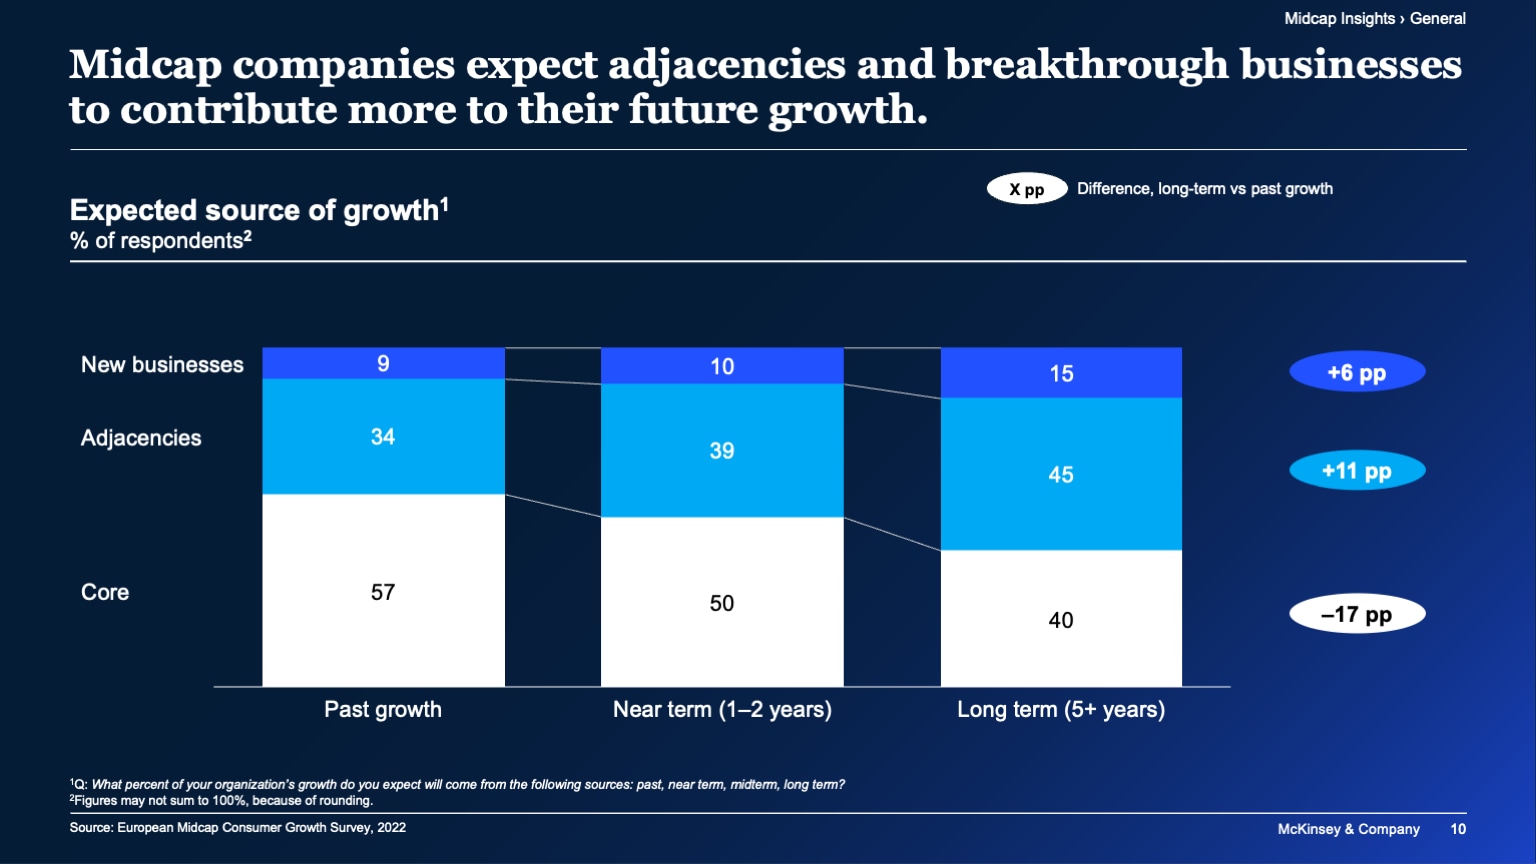 Midcap companies expect adjacencies and breakthrough businesses to contribute more to their future growth.